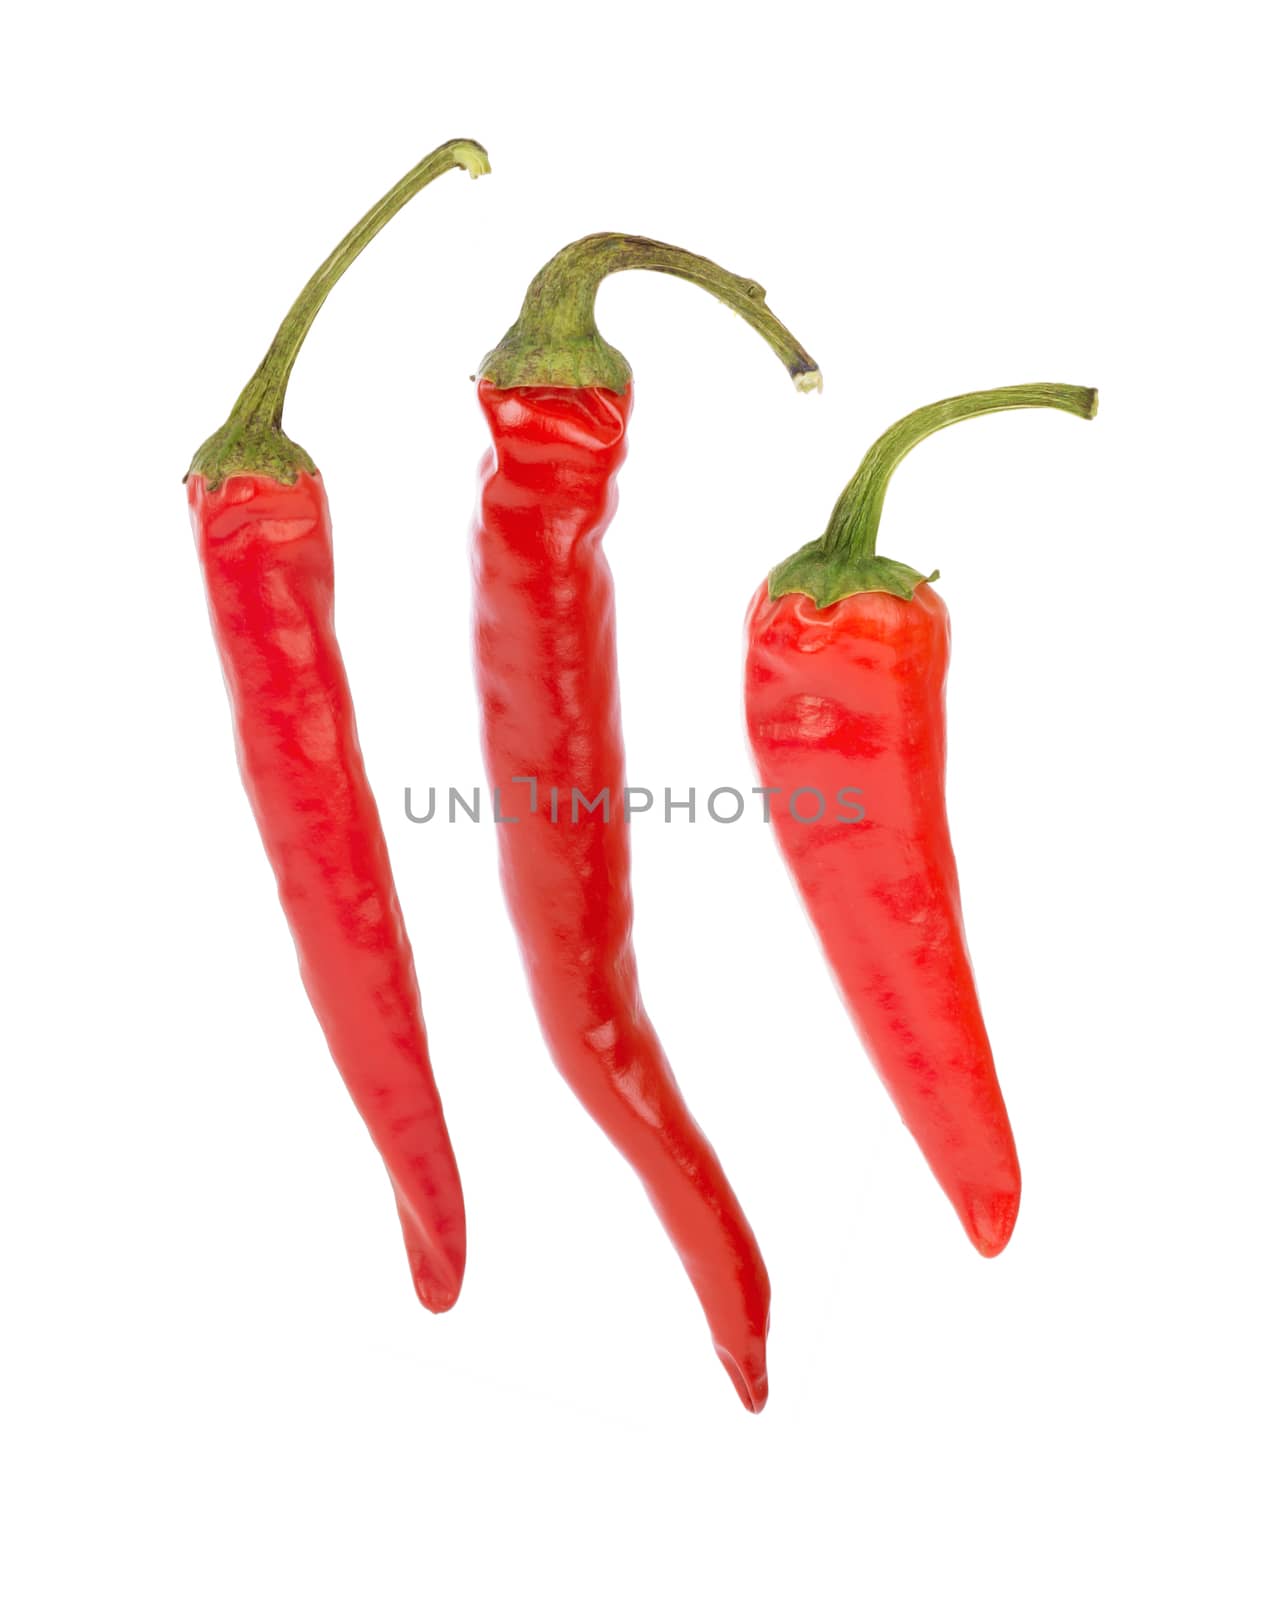 Red hot pepper single on isolated white background